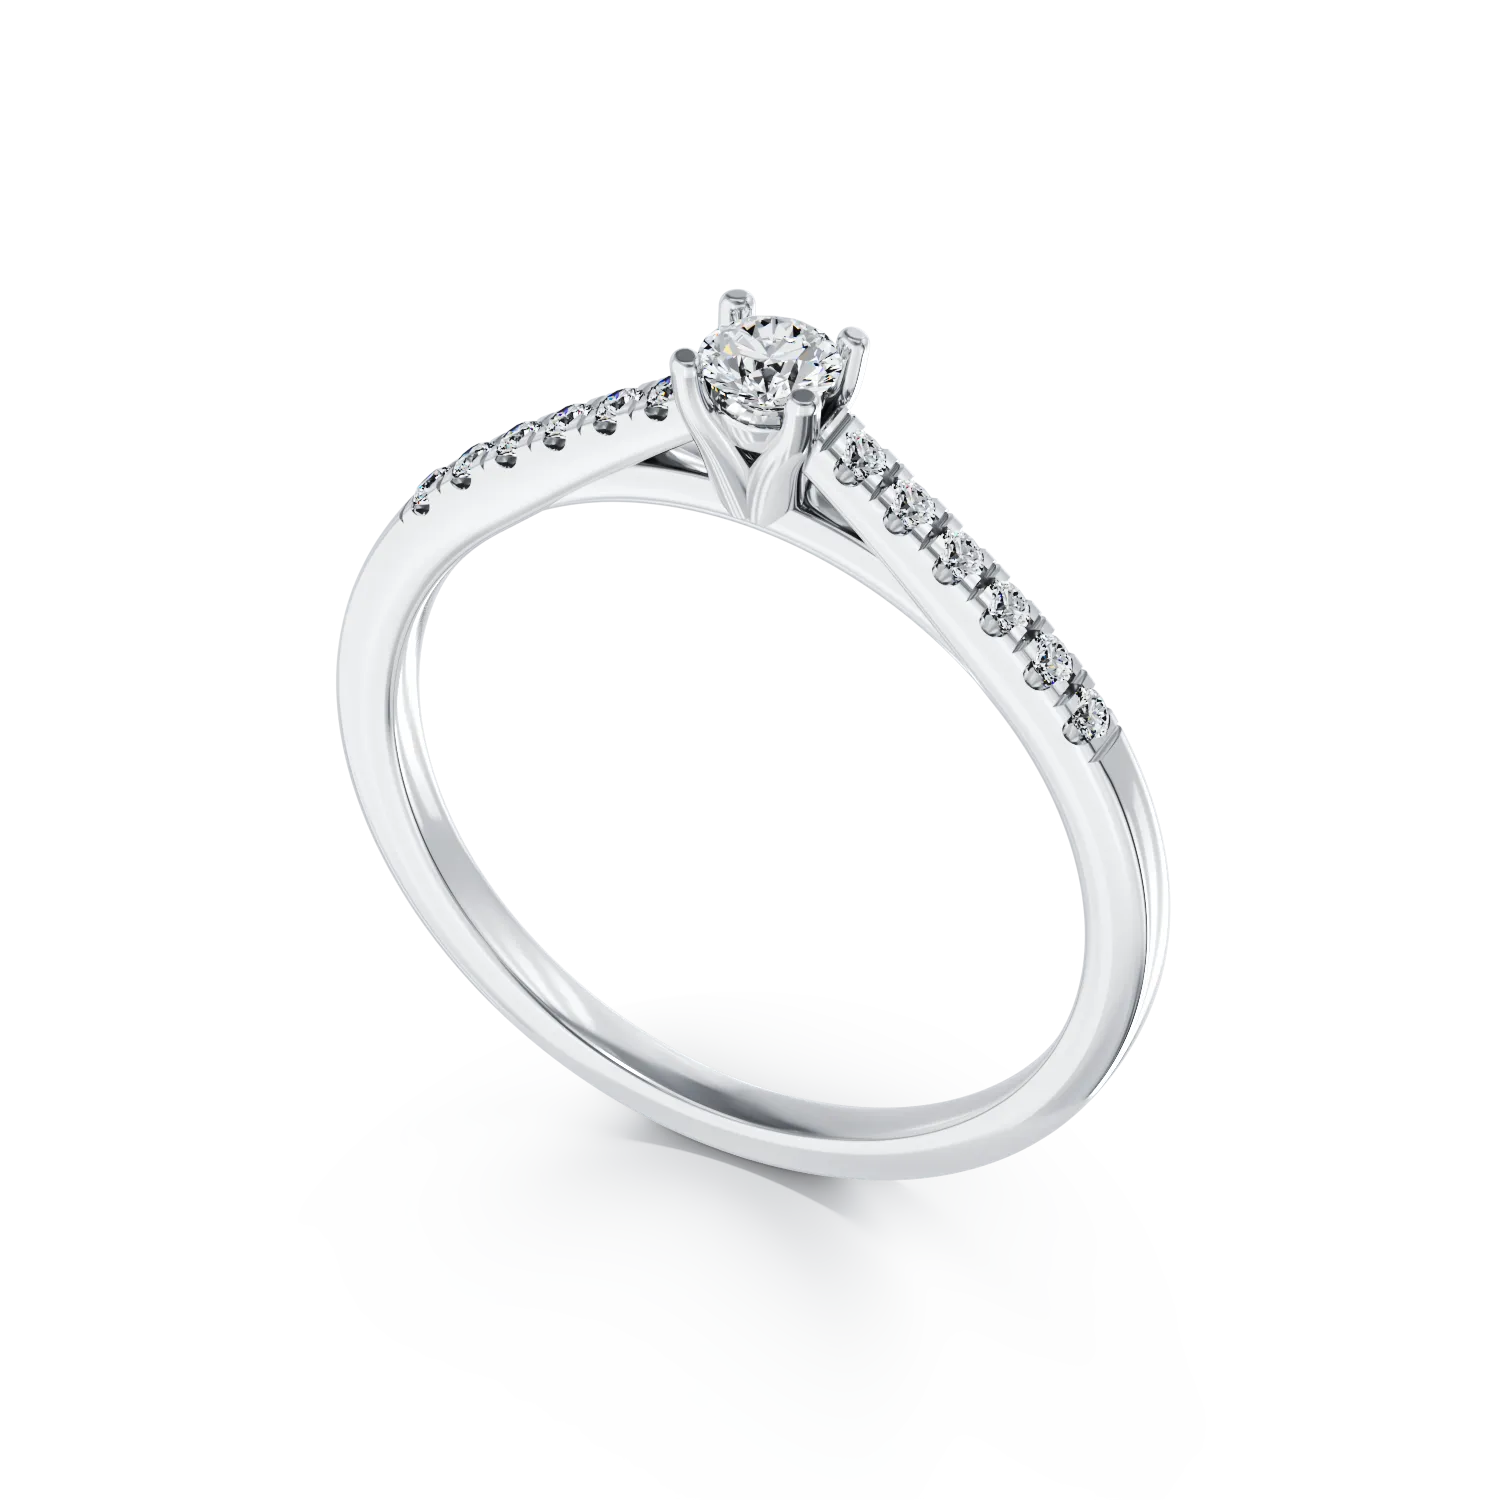 18K white gold engagement ring with 0.3ct diamond and 0.13ct diamond